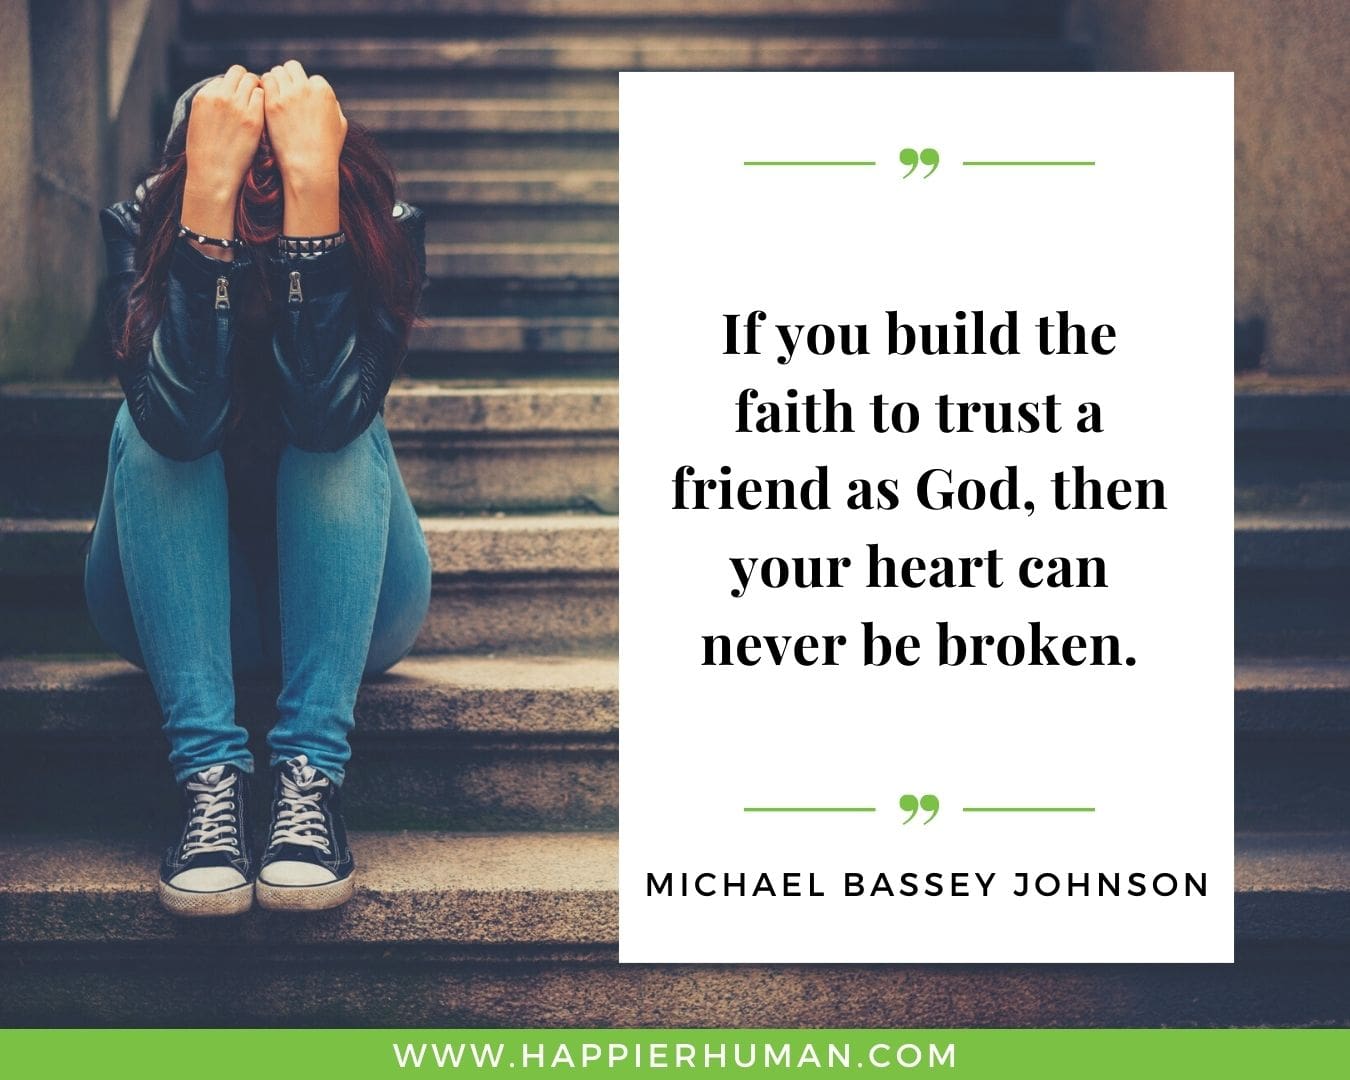 Broken Trust Quotes - “If you build the faith to trust a friend as God, then your heart can never be broken.” - Michael Bassey Johnson